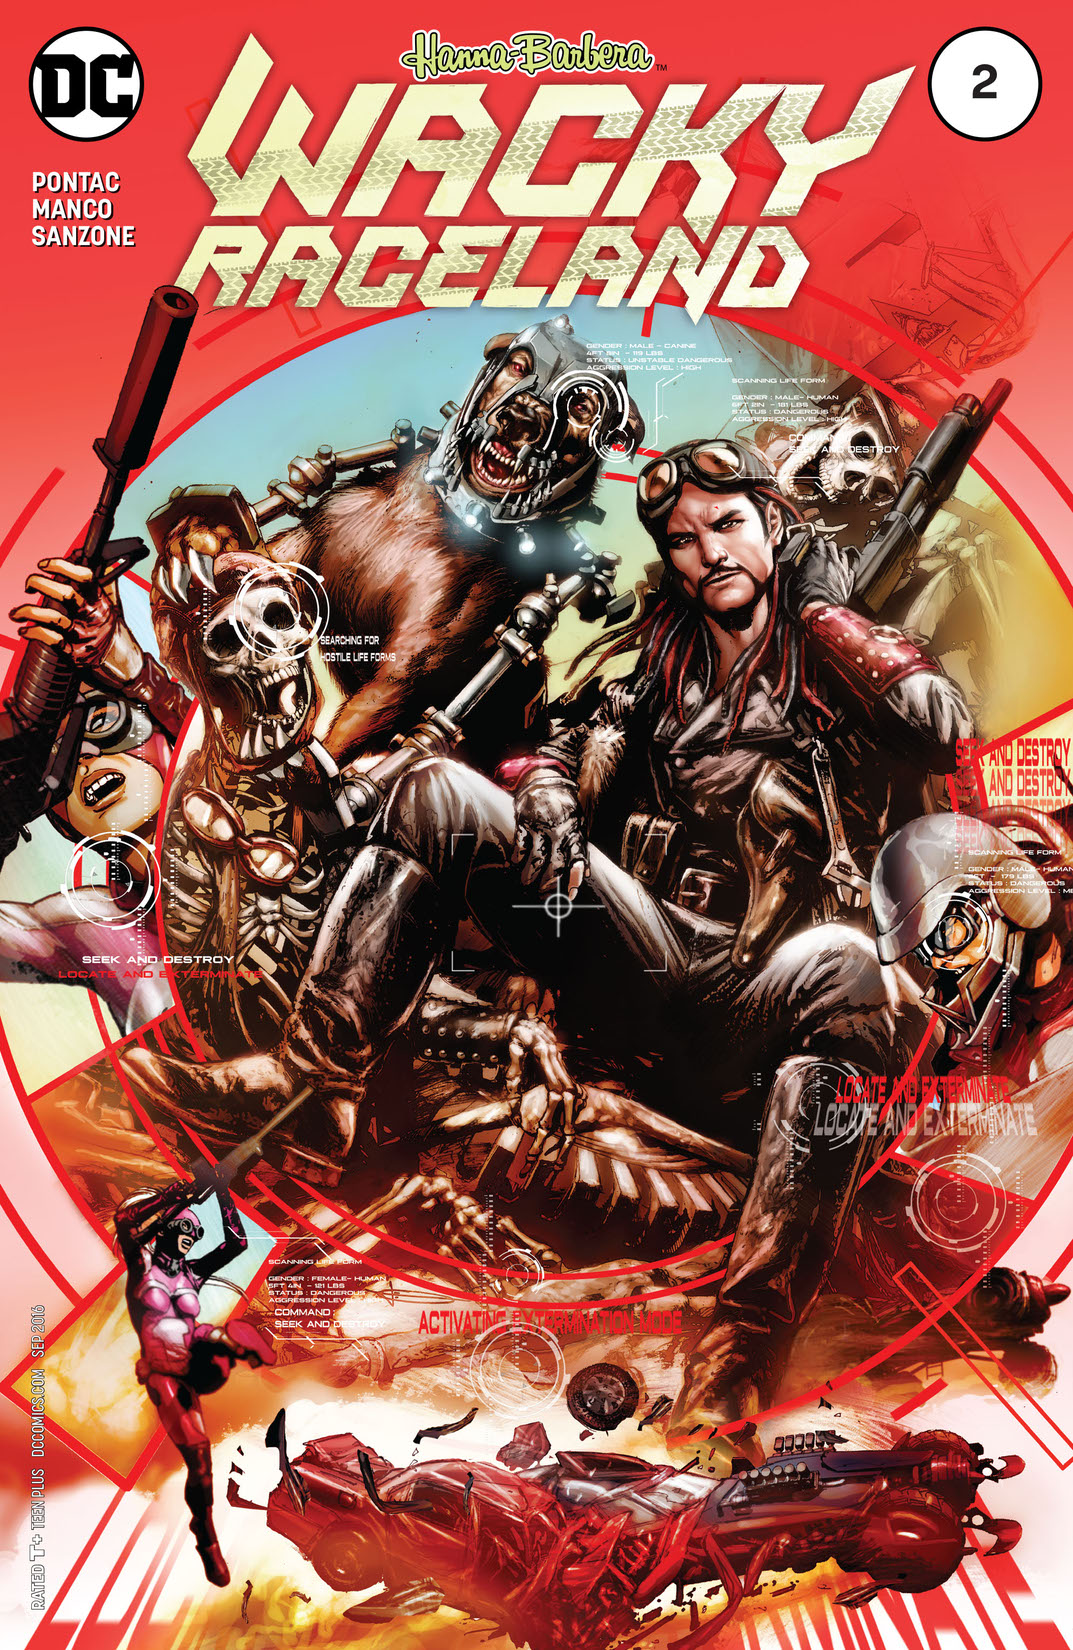 Wacky Raceland #2 preview images